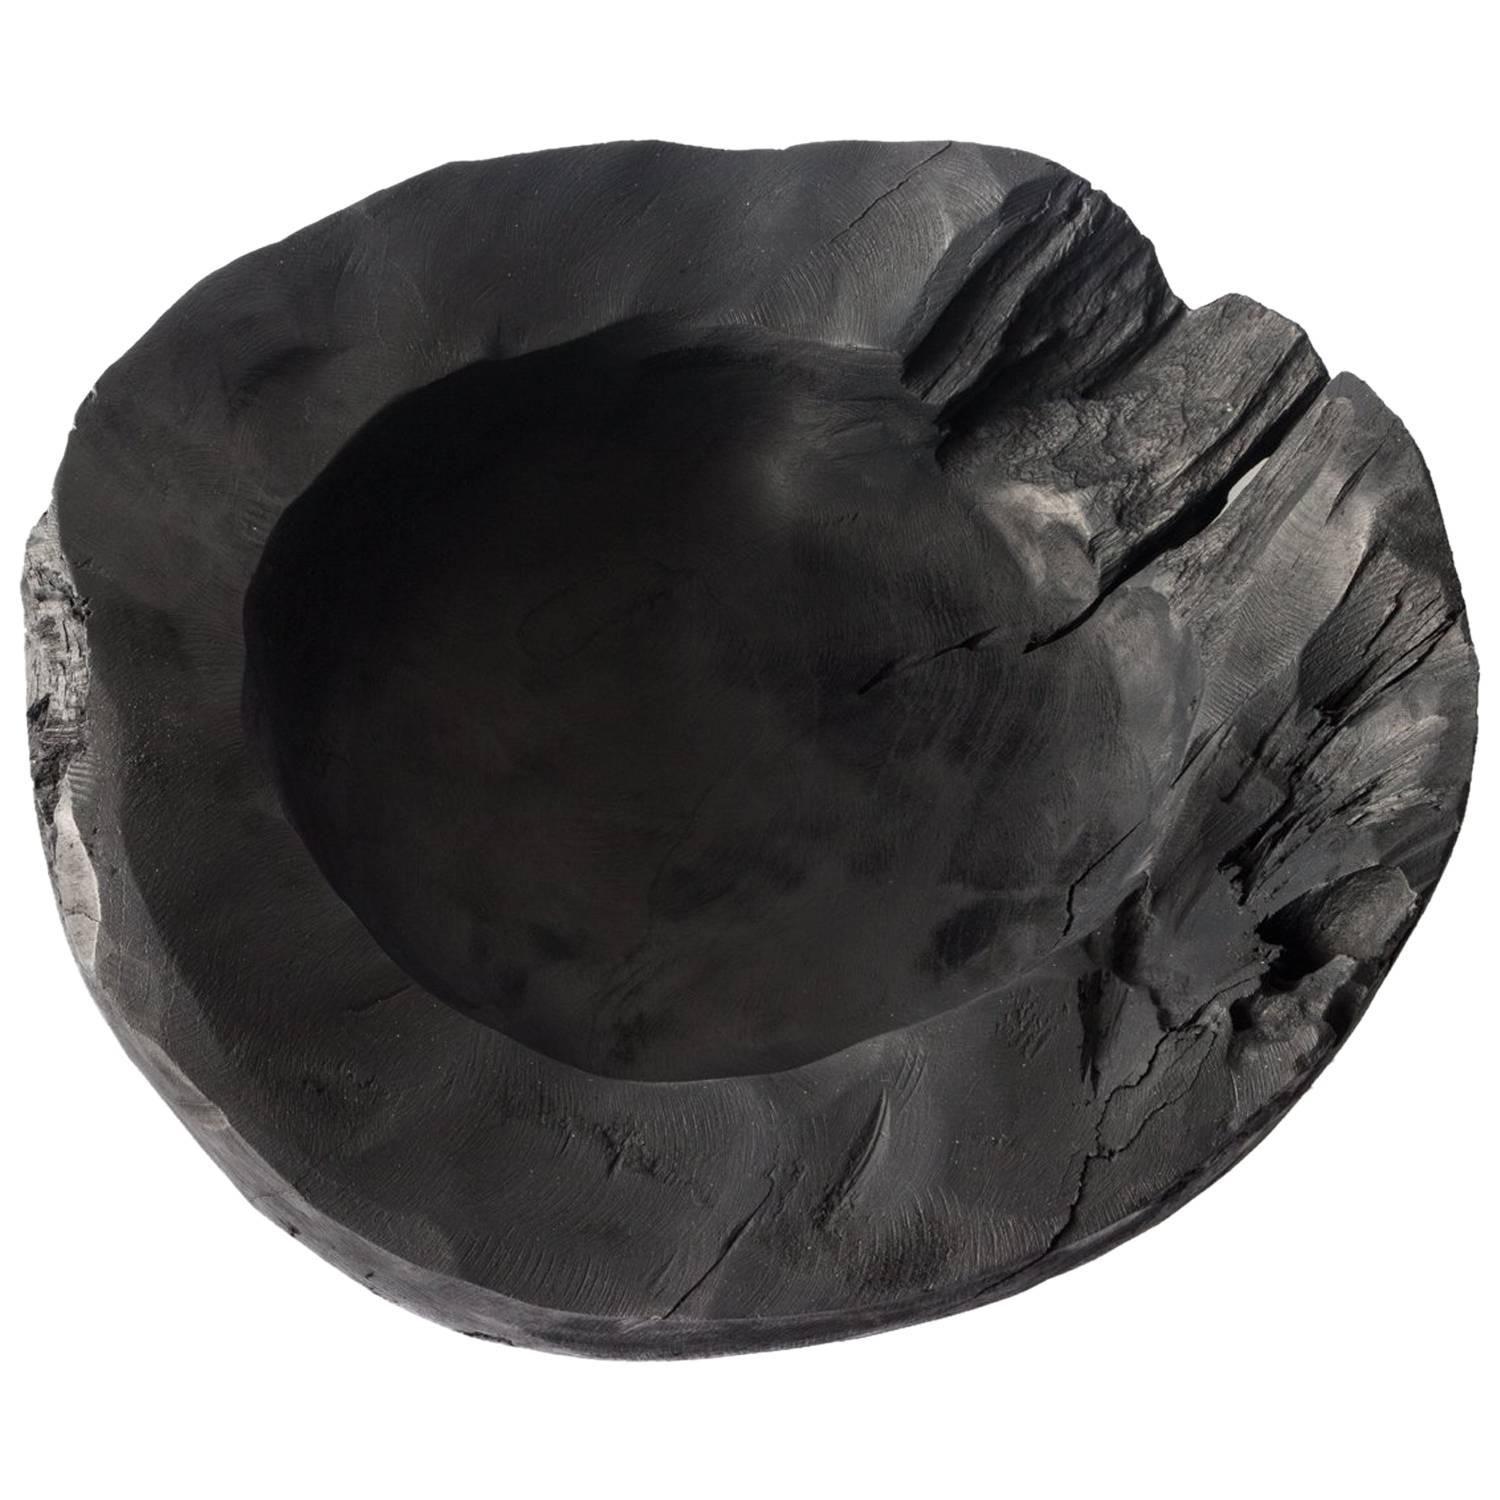 Hand-Carved Reclaimed Wood Bowl by Lukas Machnik For Sale